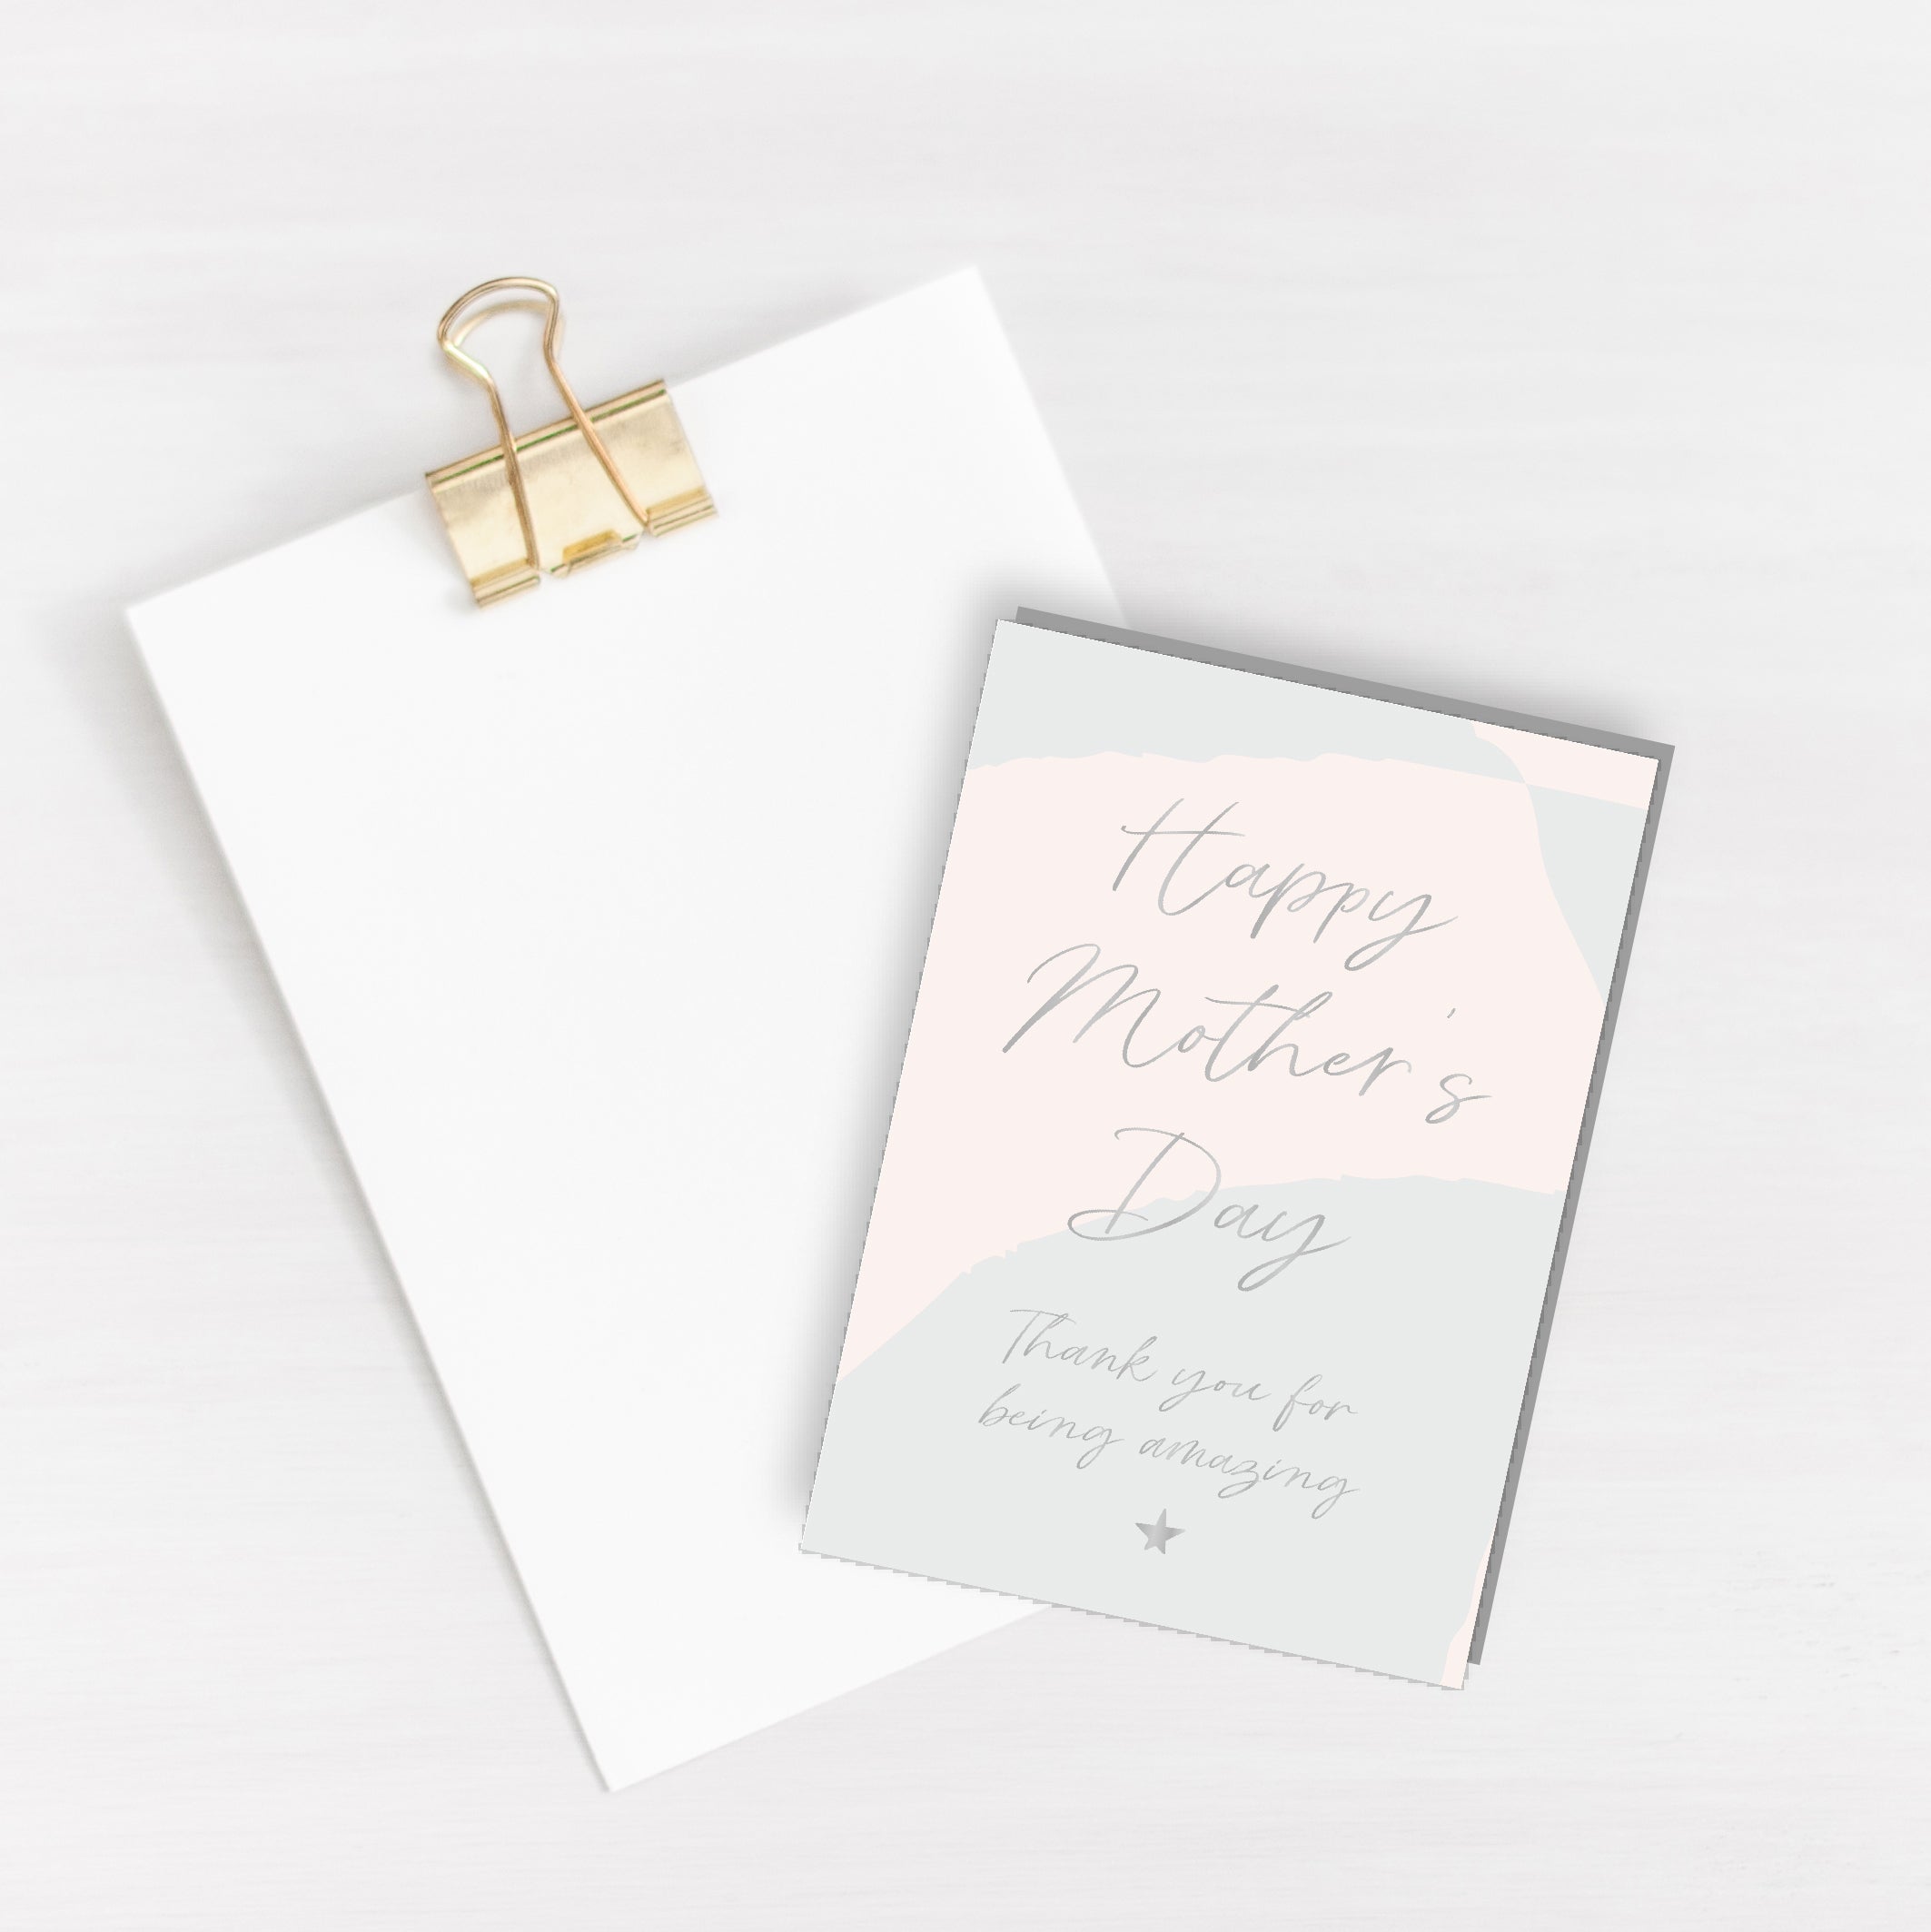 Thank you for being amazing - Mother's Day Card